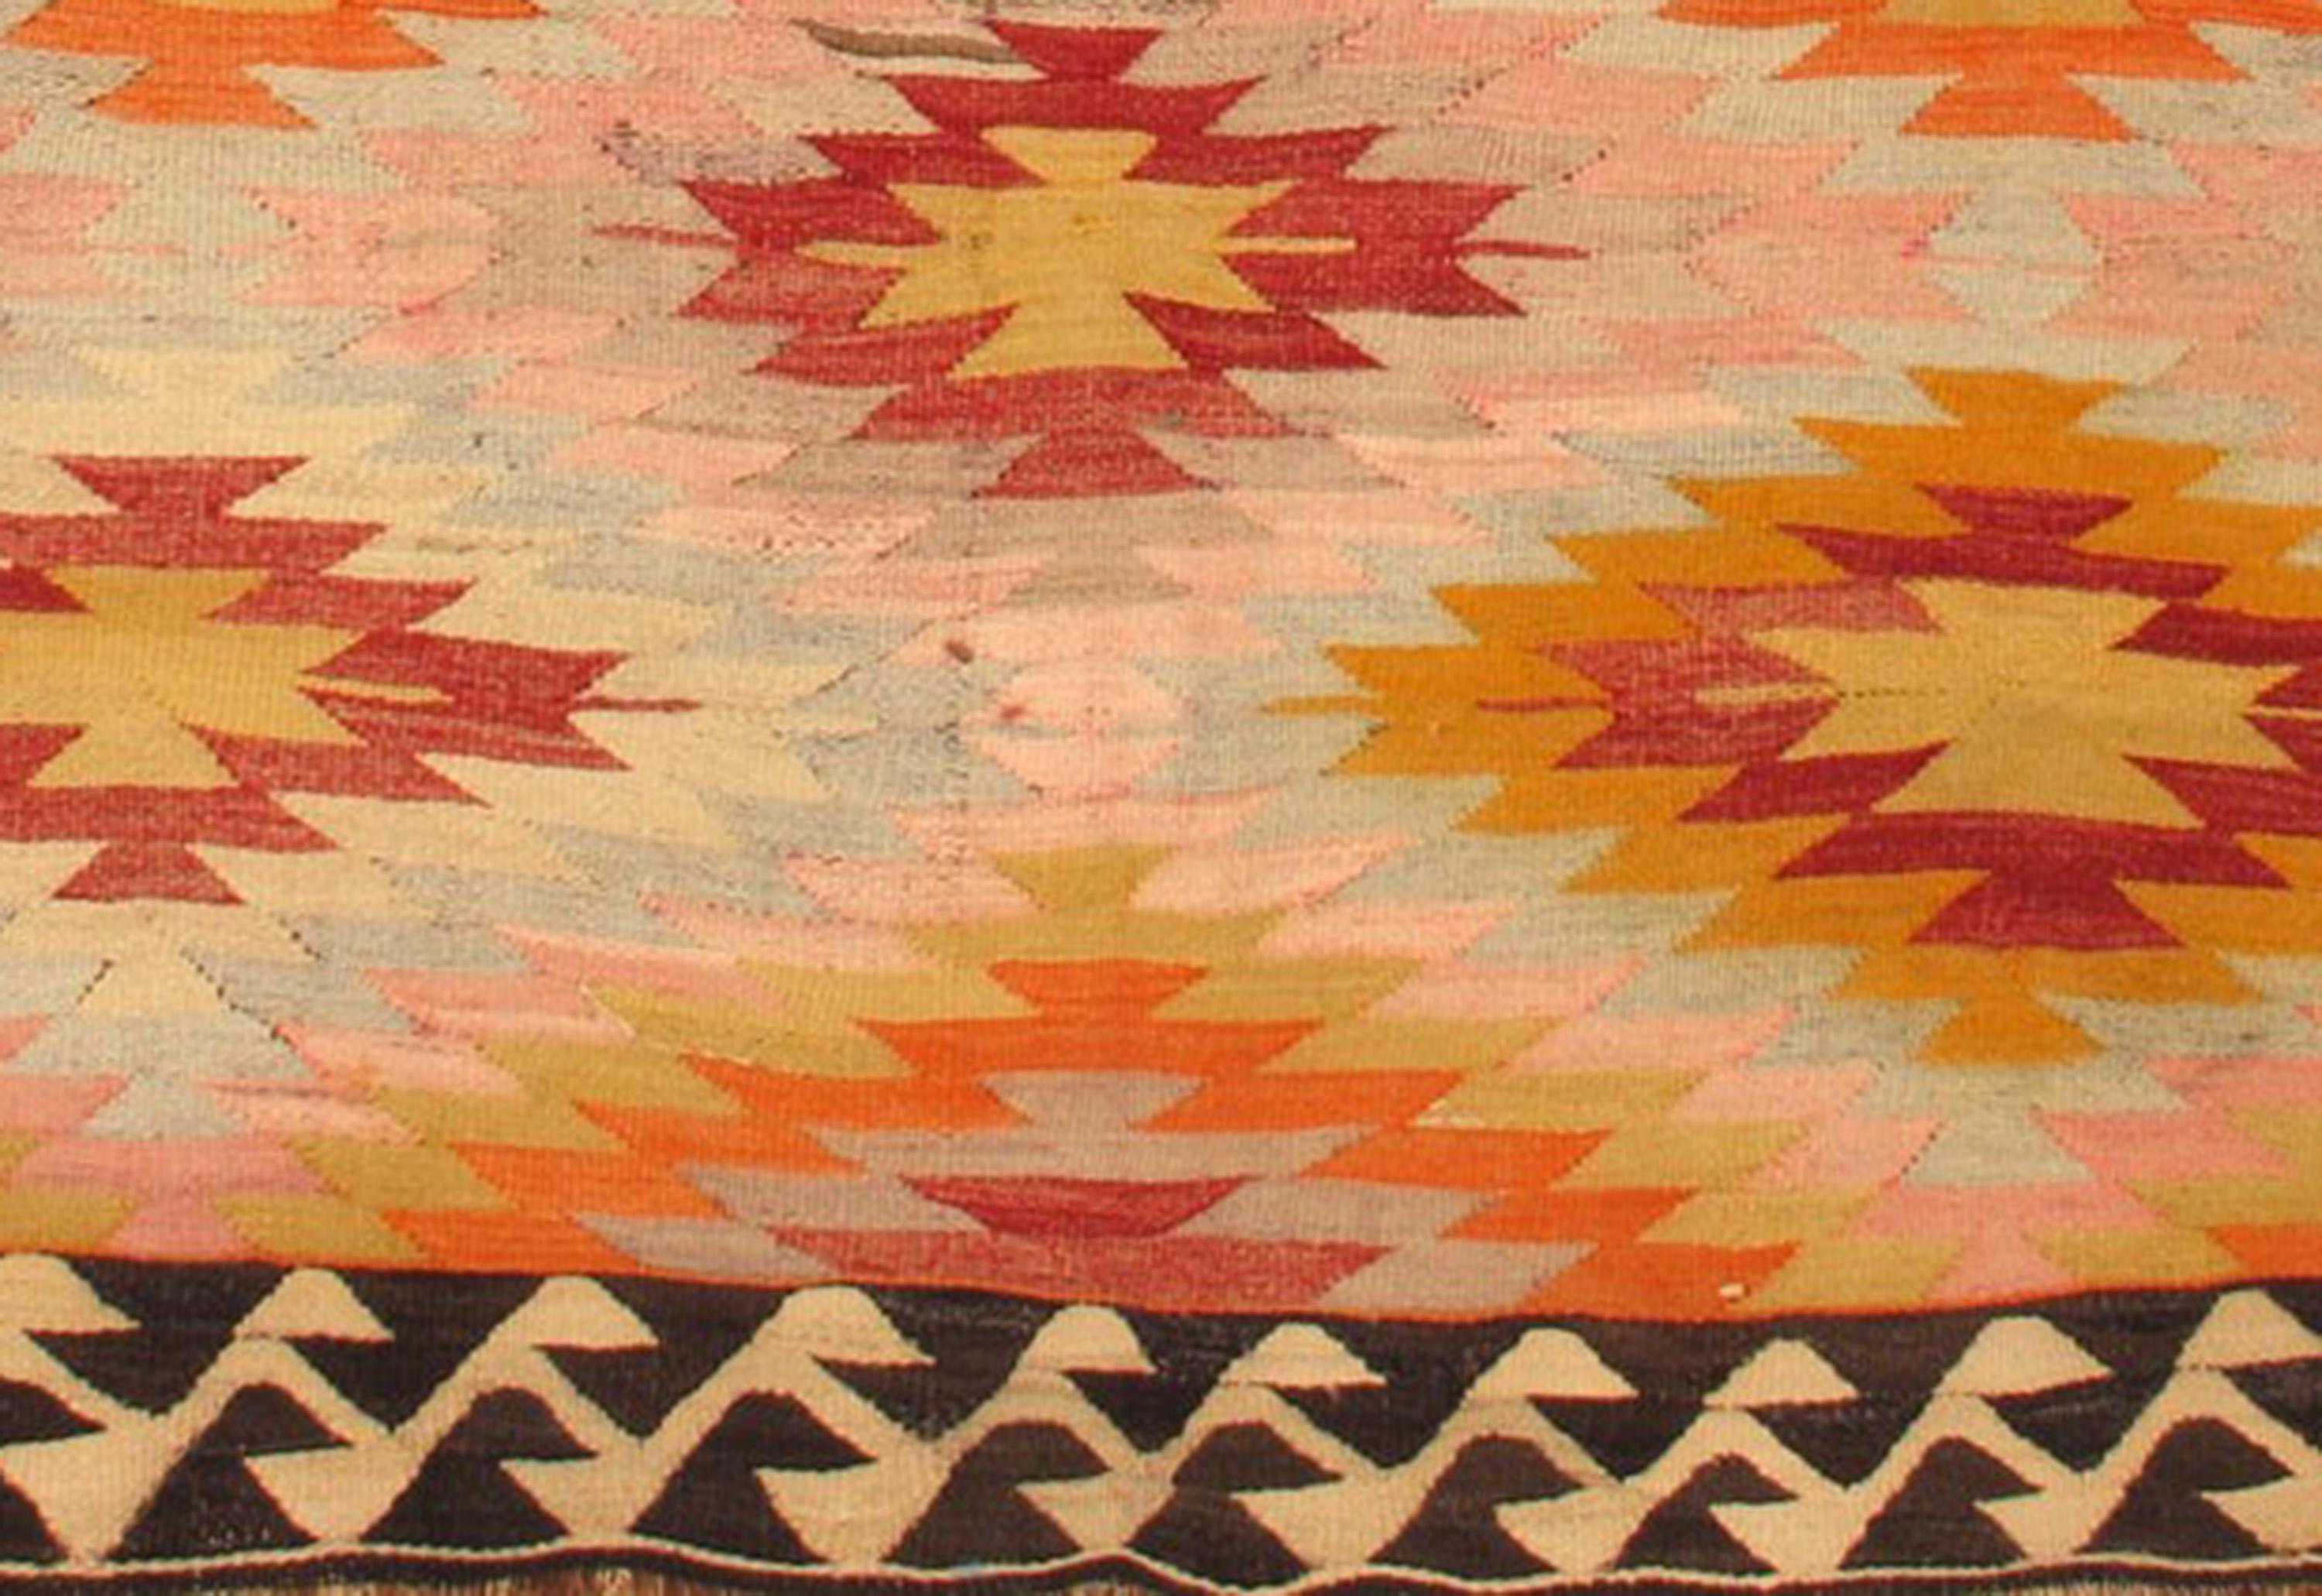 Vintage 1960s Multi-Colored Geometric Turkish Kilim Rug In Excellent Condition For Sale In Norwalk, CT